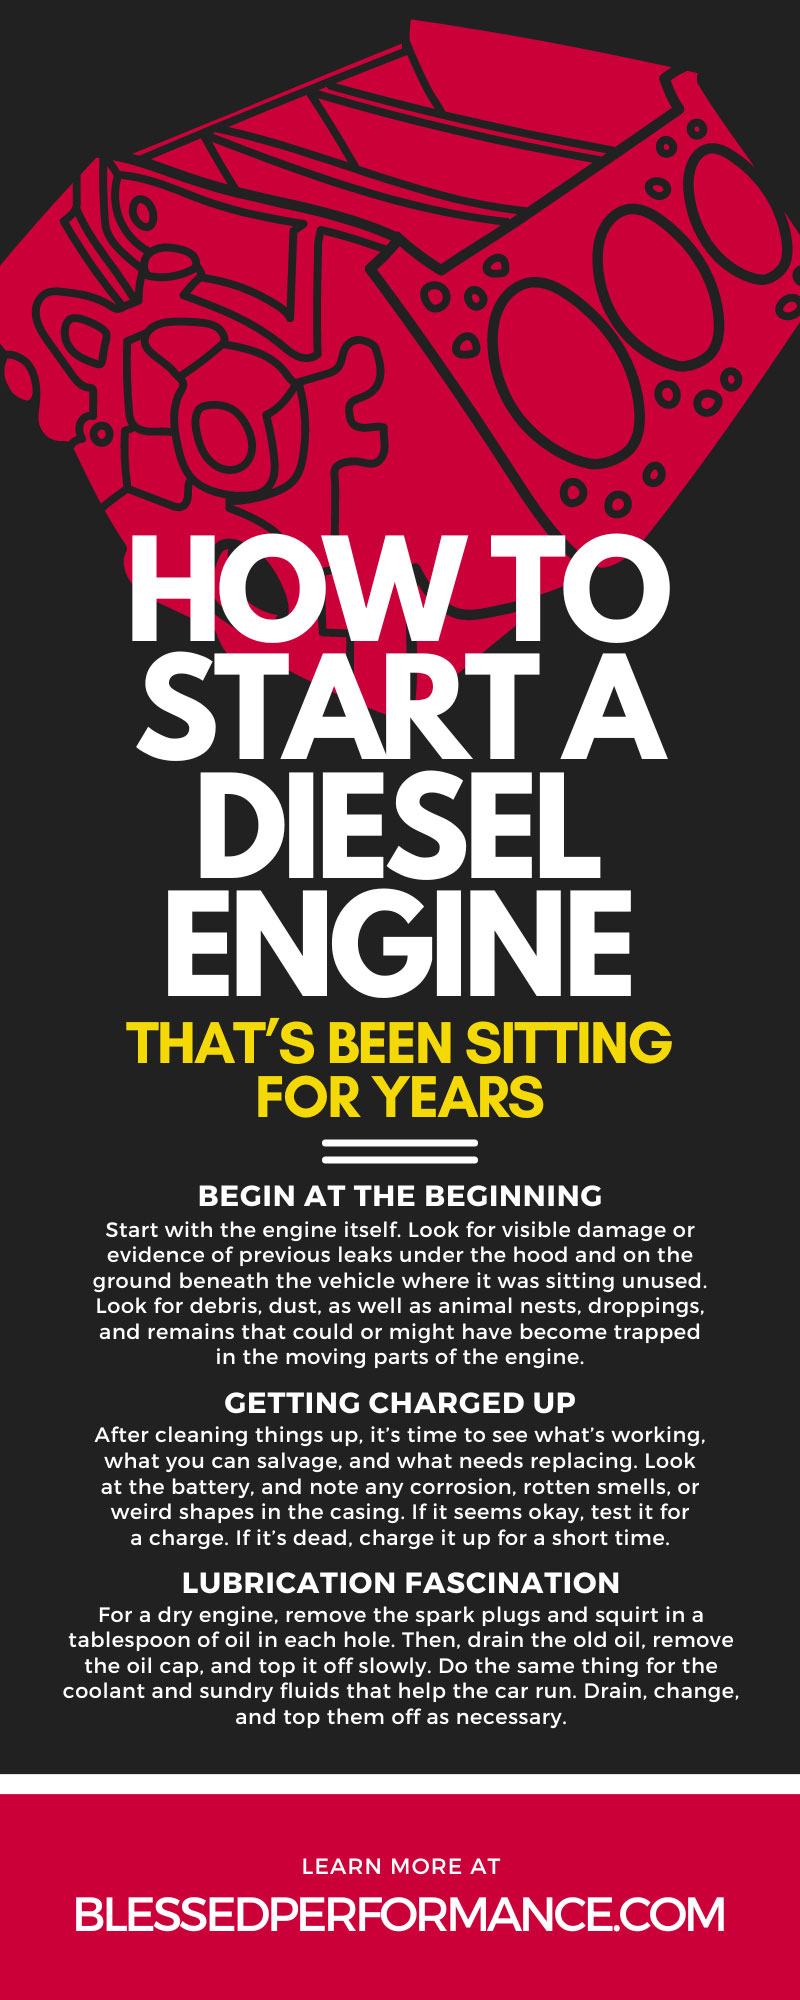 How To Start a Diesel Engine That’s Been Sitting for Years